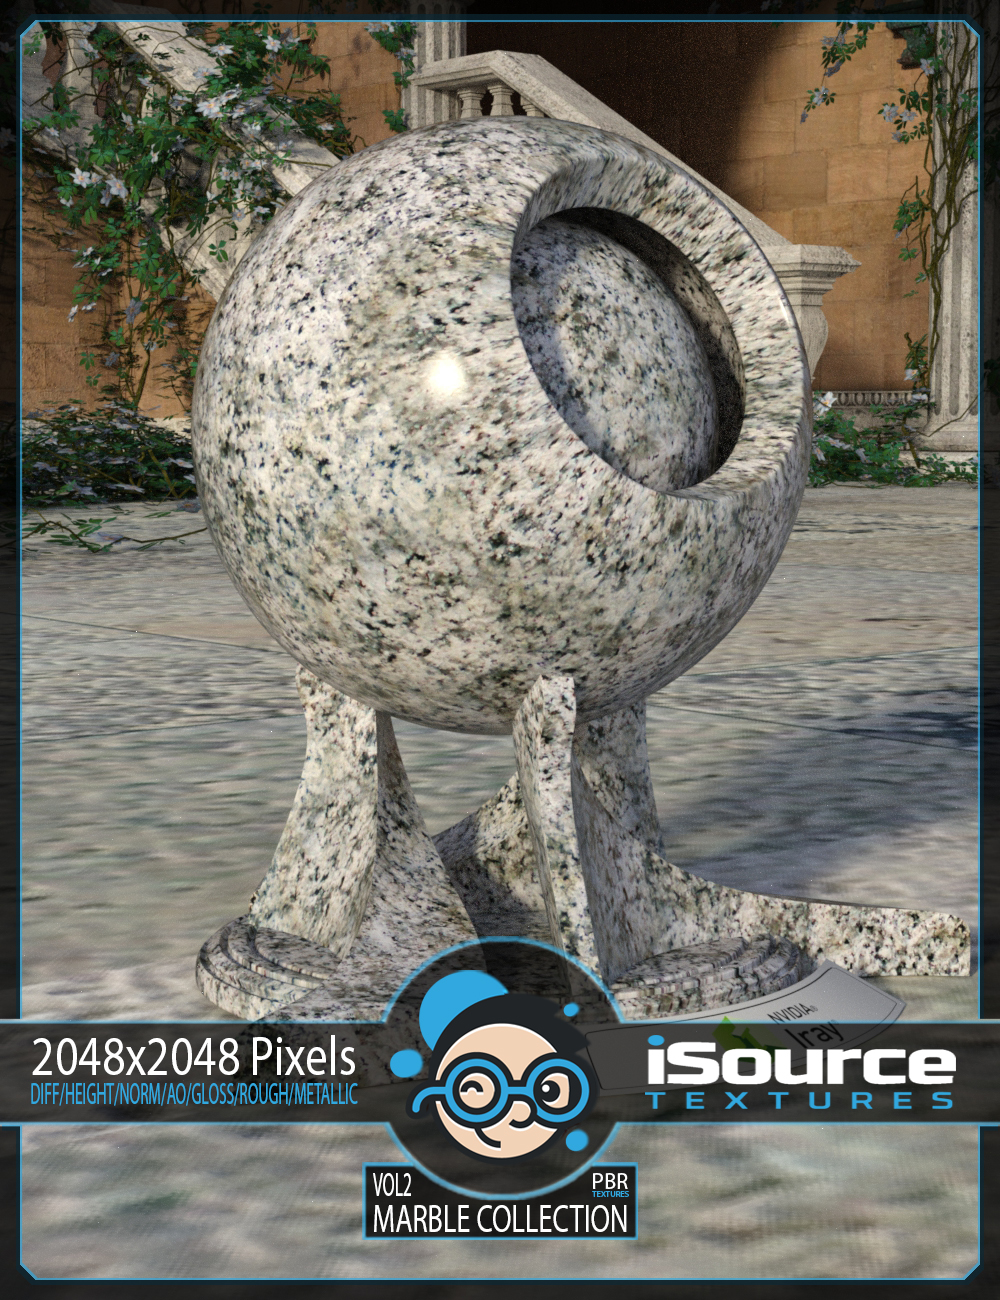 Marble Collection Merchant Resource - Vol2 (PBR Textures) by: iSourceTextures, 3D Models by Daz 3D